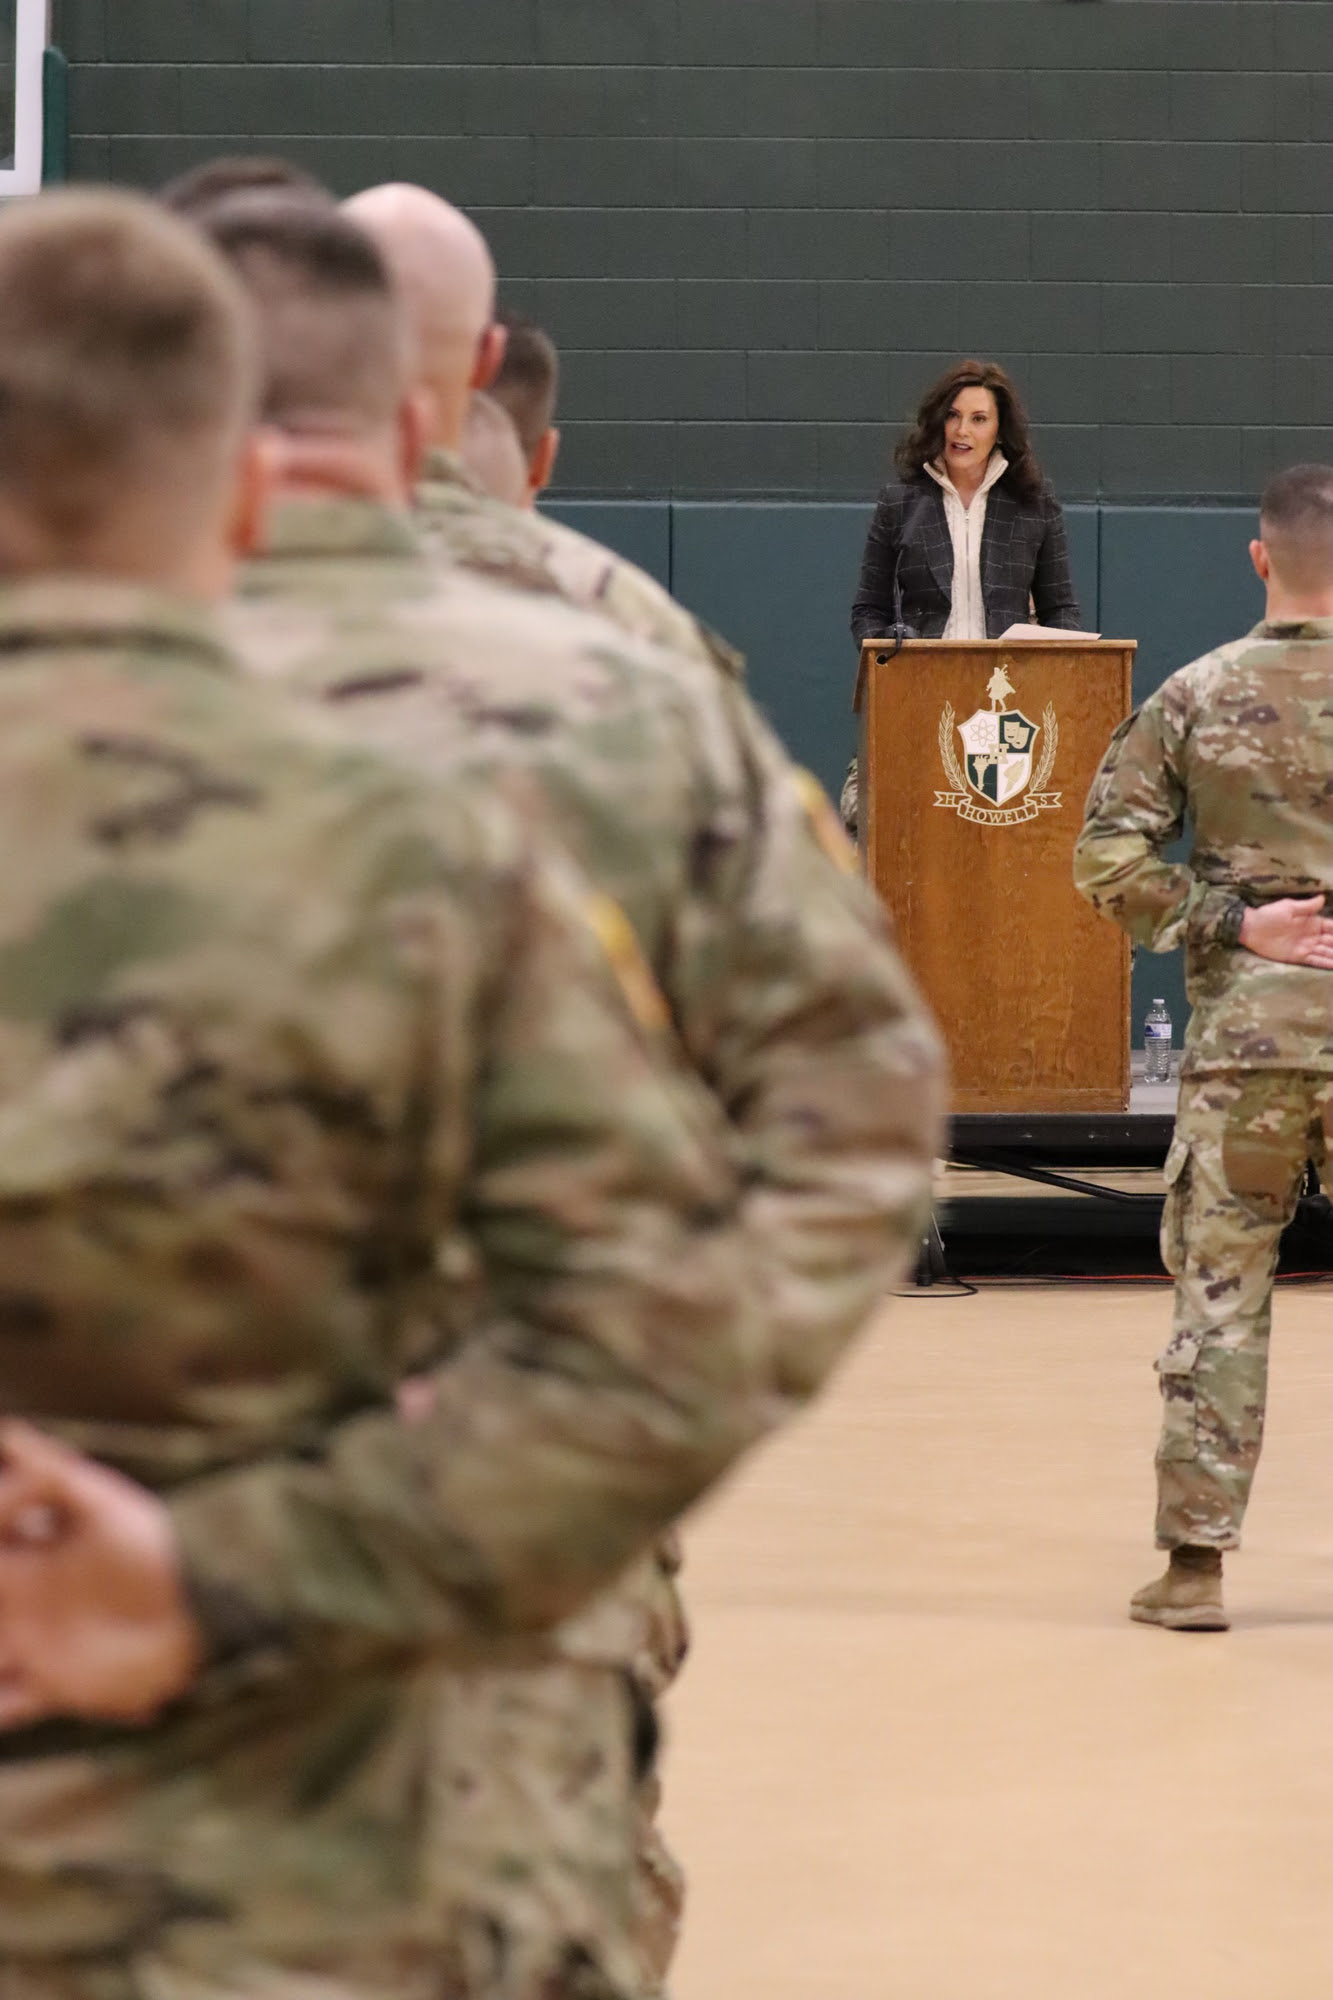 Gov. Whitmer speaks at podium during the deployment ceremony at Howell High School